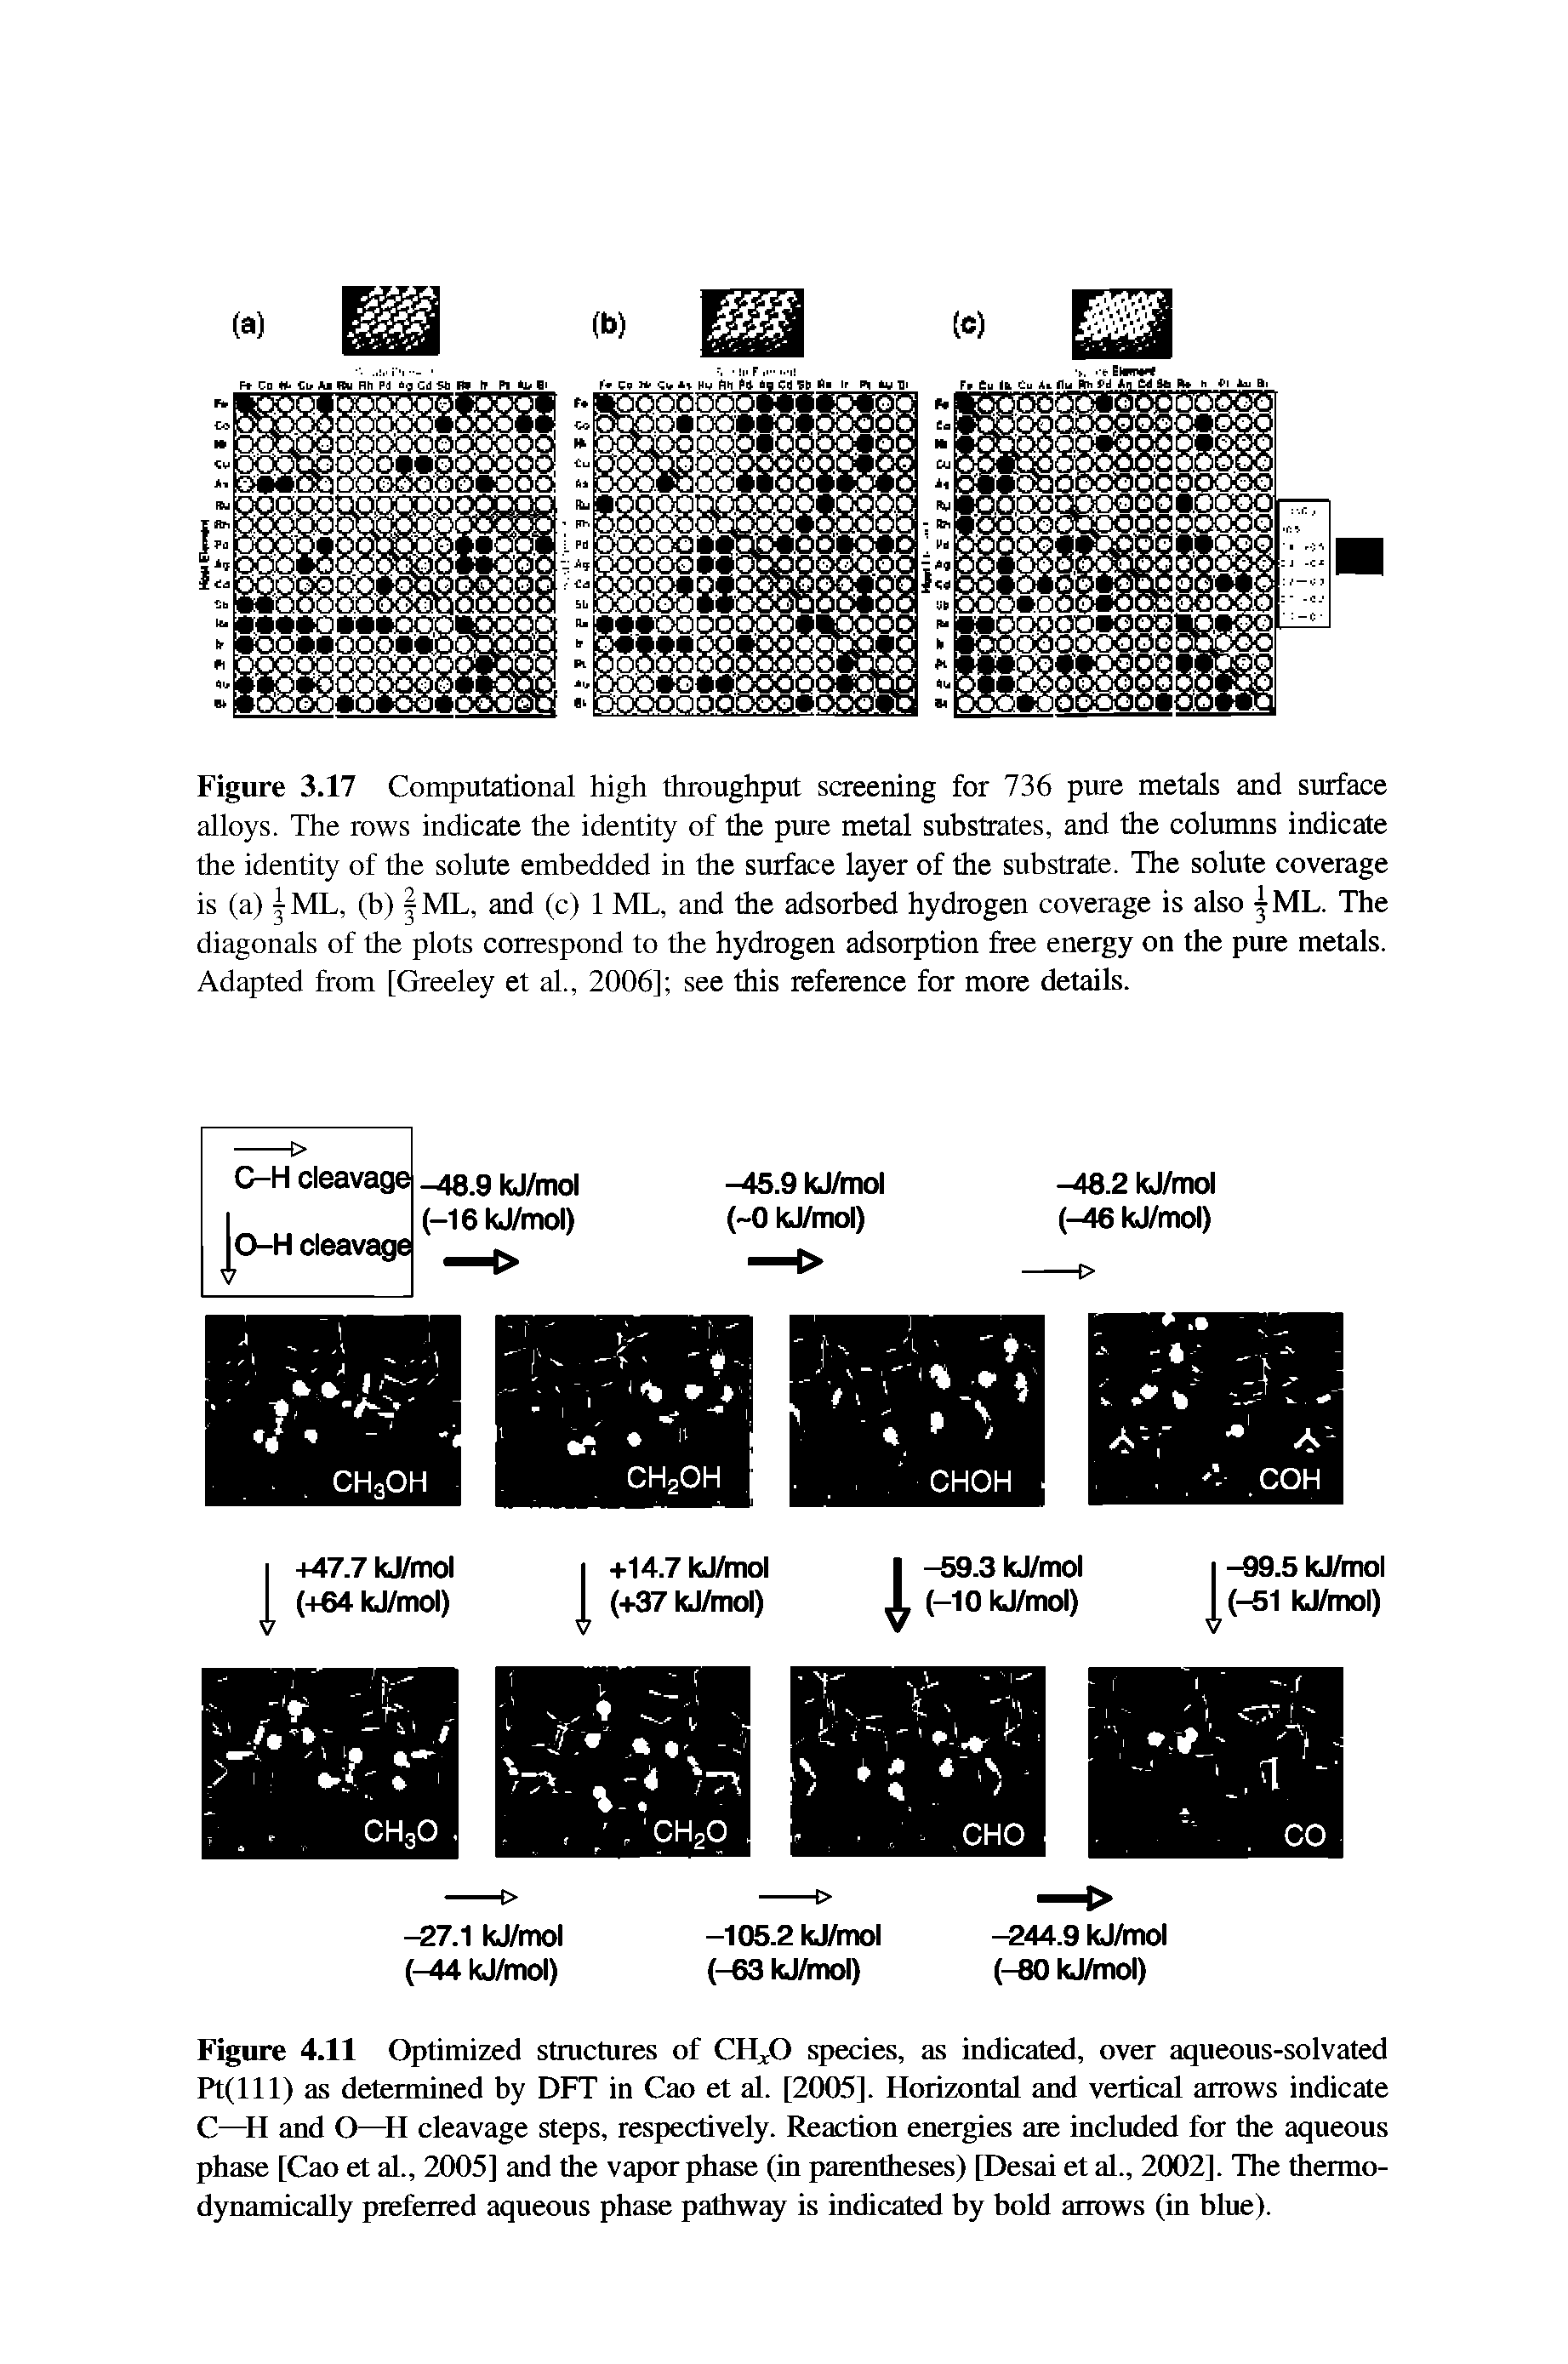 Figure 3.17 Computational high throughput screening for 736 pure metals and surface alloys. The rows indicate the identity of the pure metal substrates, and the columns indicate the identity of the solute embedded in the surface layer of the substrate. The solute coverage is (a) ilVIL, (b) ML, and (c) 1 ML, and the adsorbed hydrogen coverage is also jML. The diagonals of the plots correspond to the hydrogen adsorption free energy on the pure metals. Adapted from [Greeley et al., 2006] see this reference for more details.